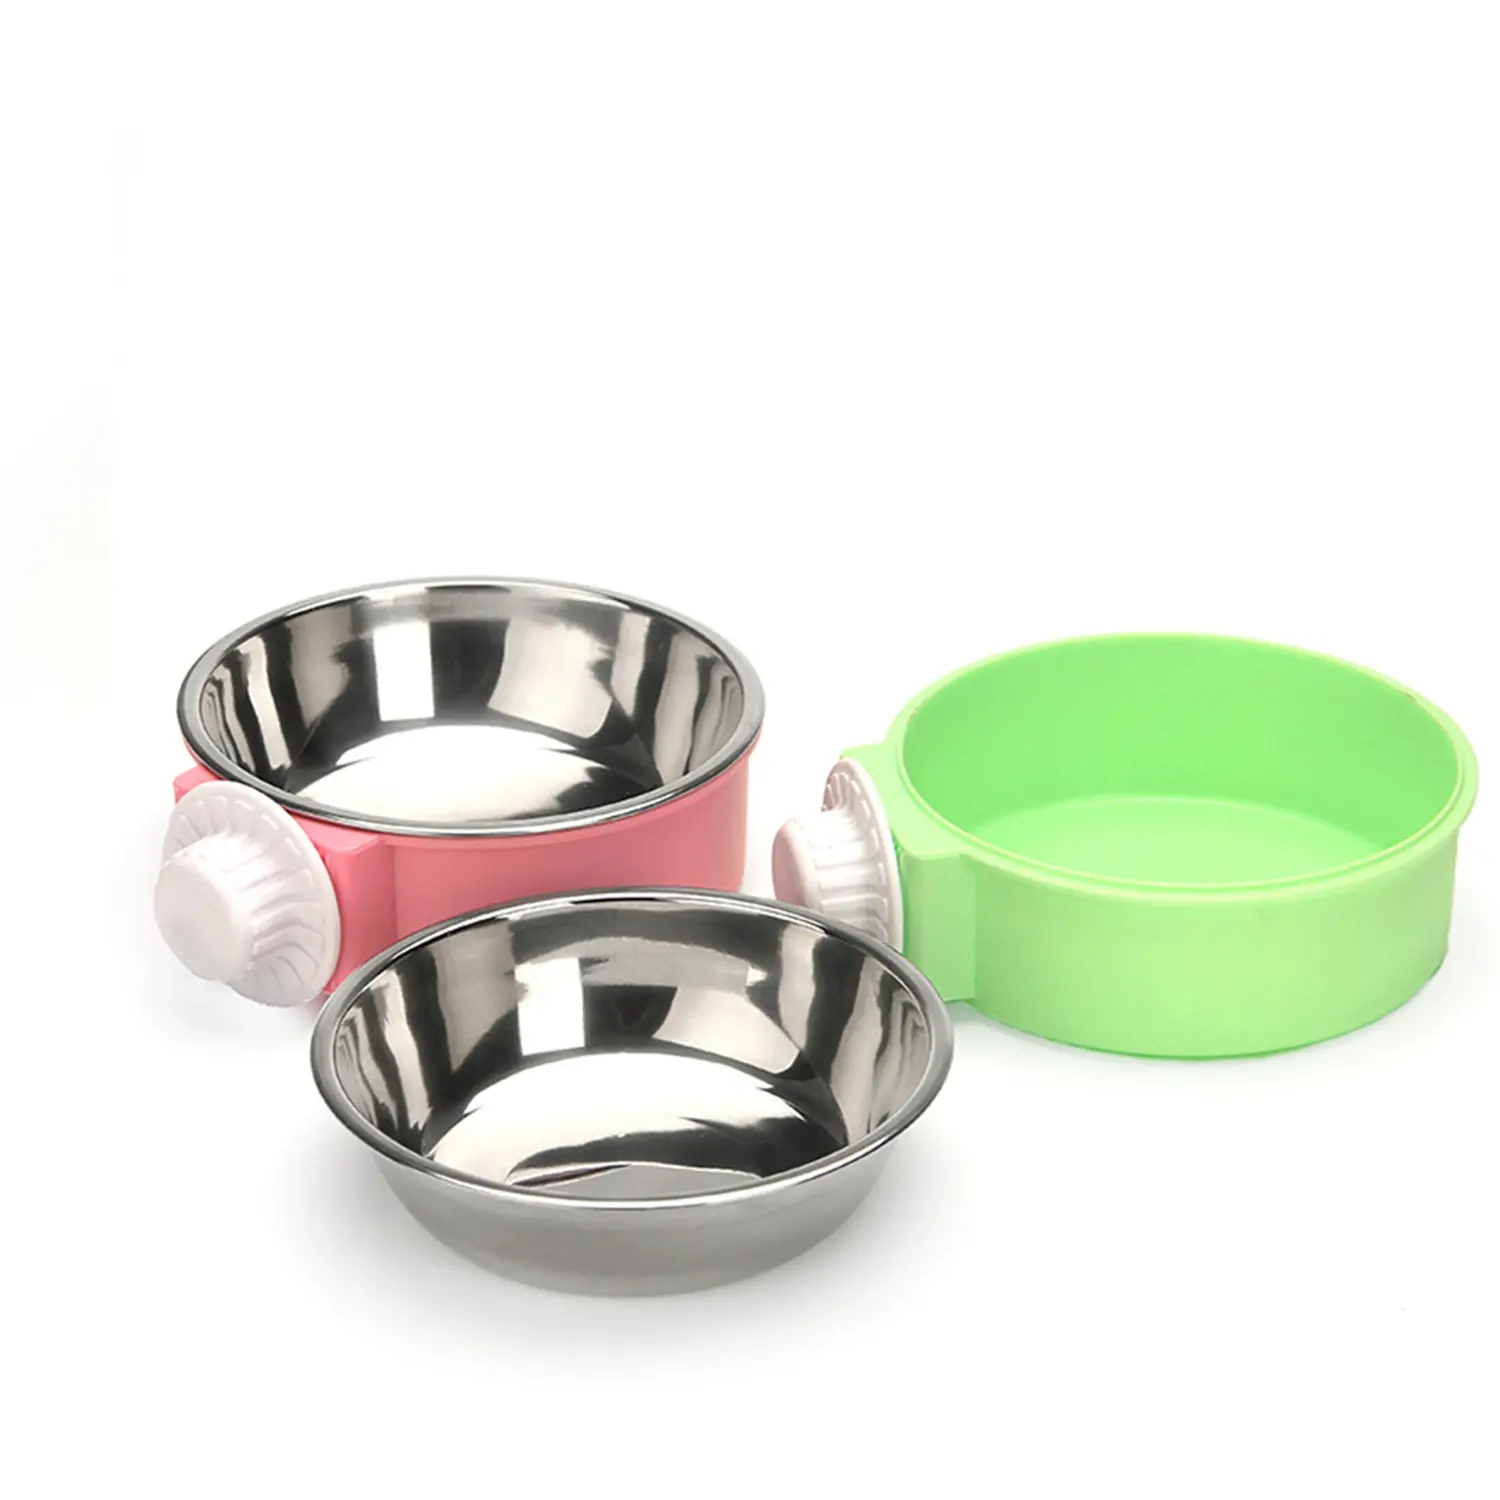 Hanging pet bowl for dogs and cats stainless steel dog bowl